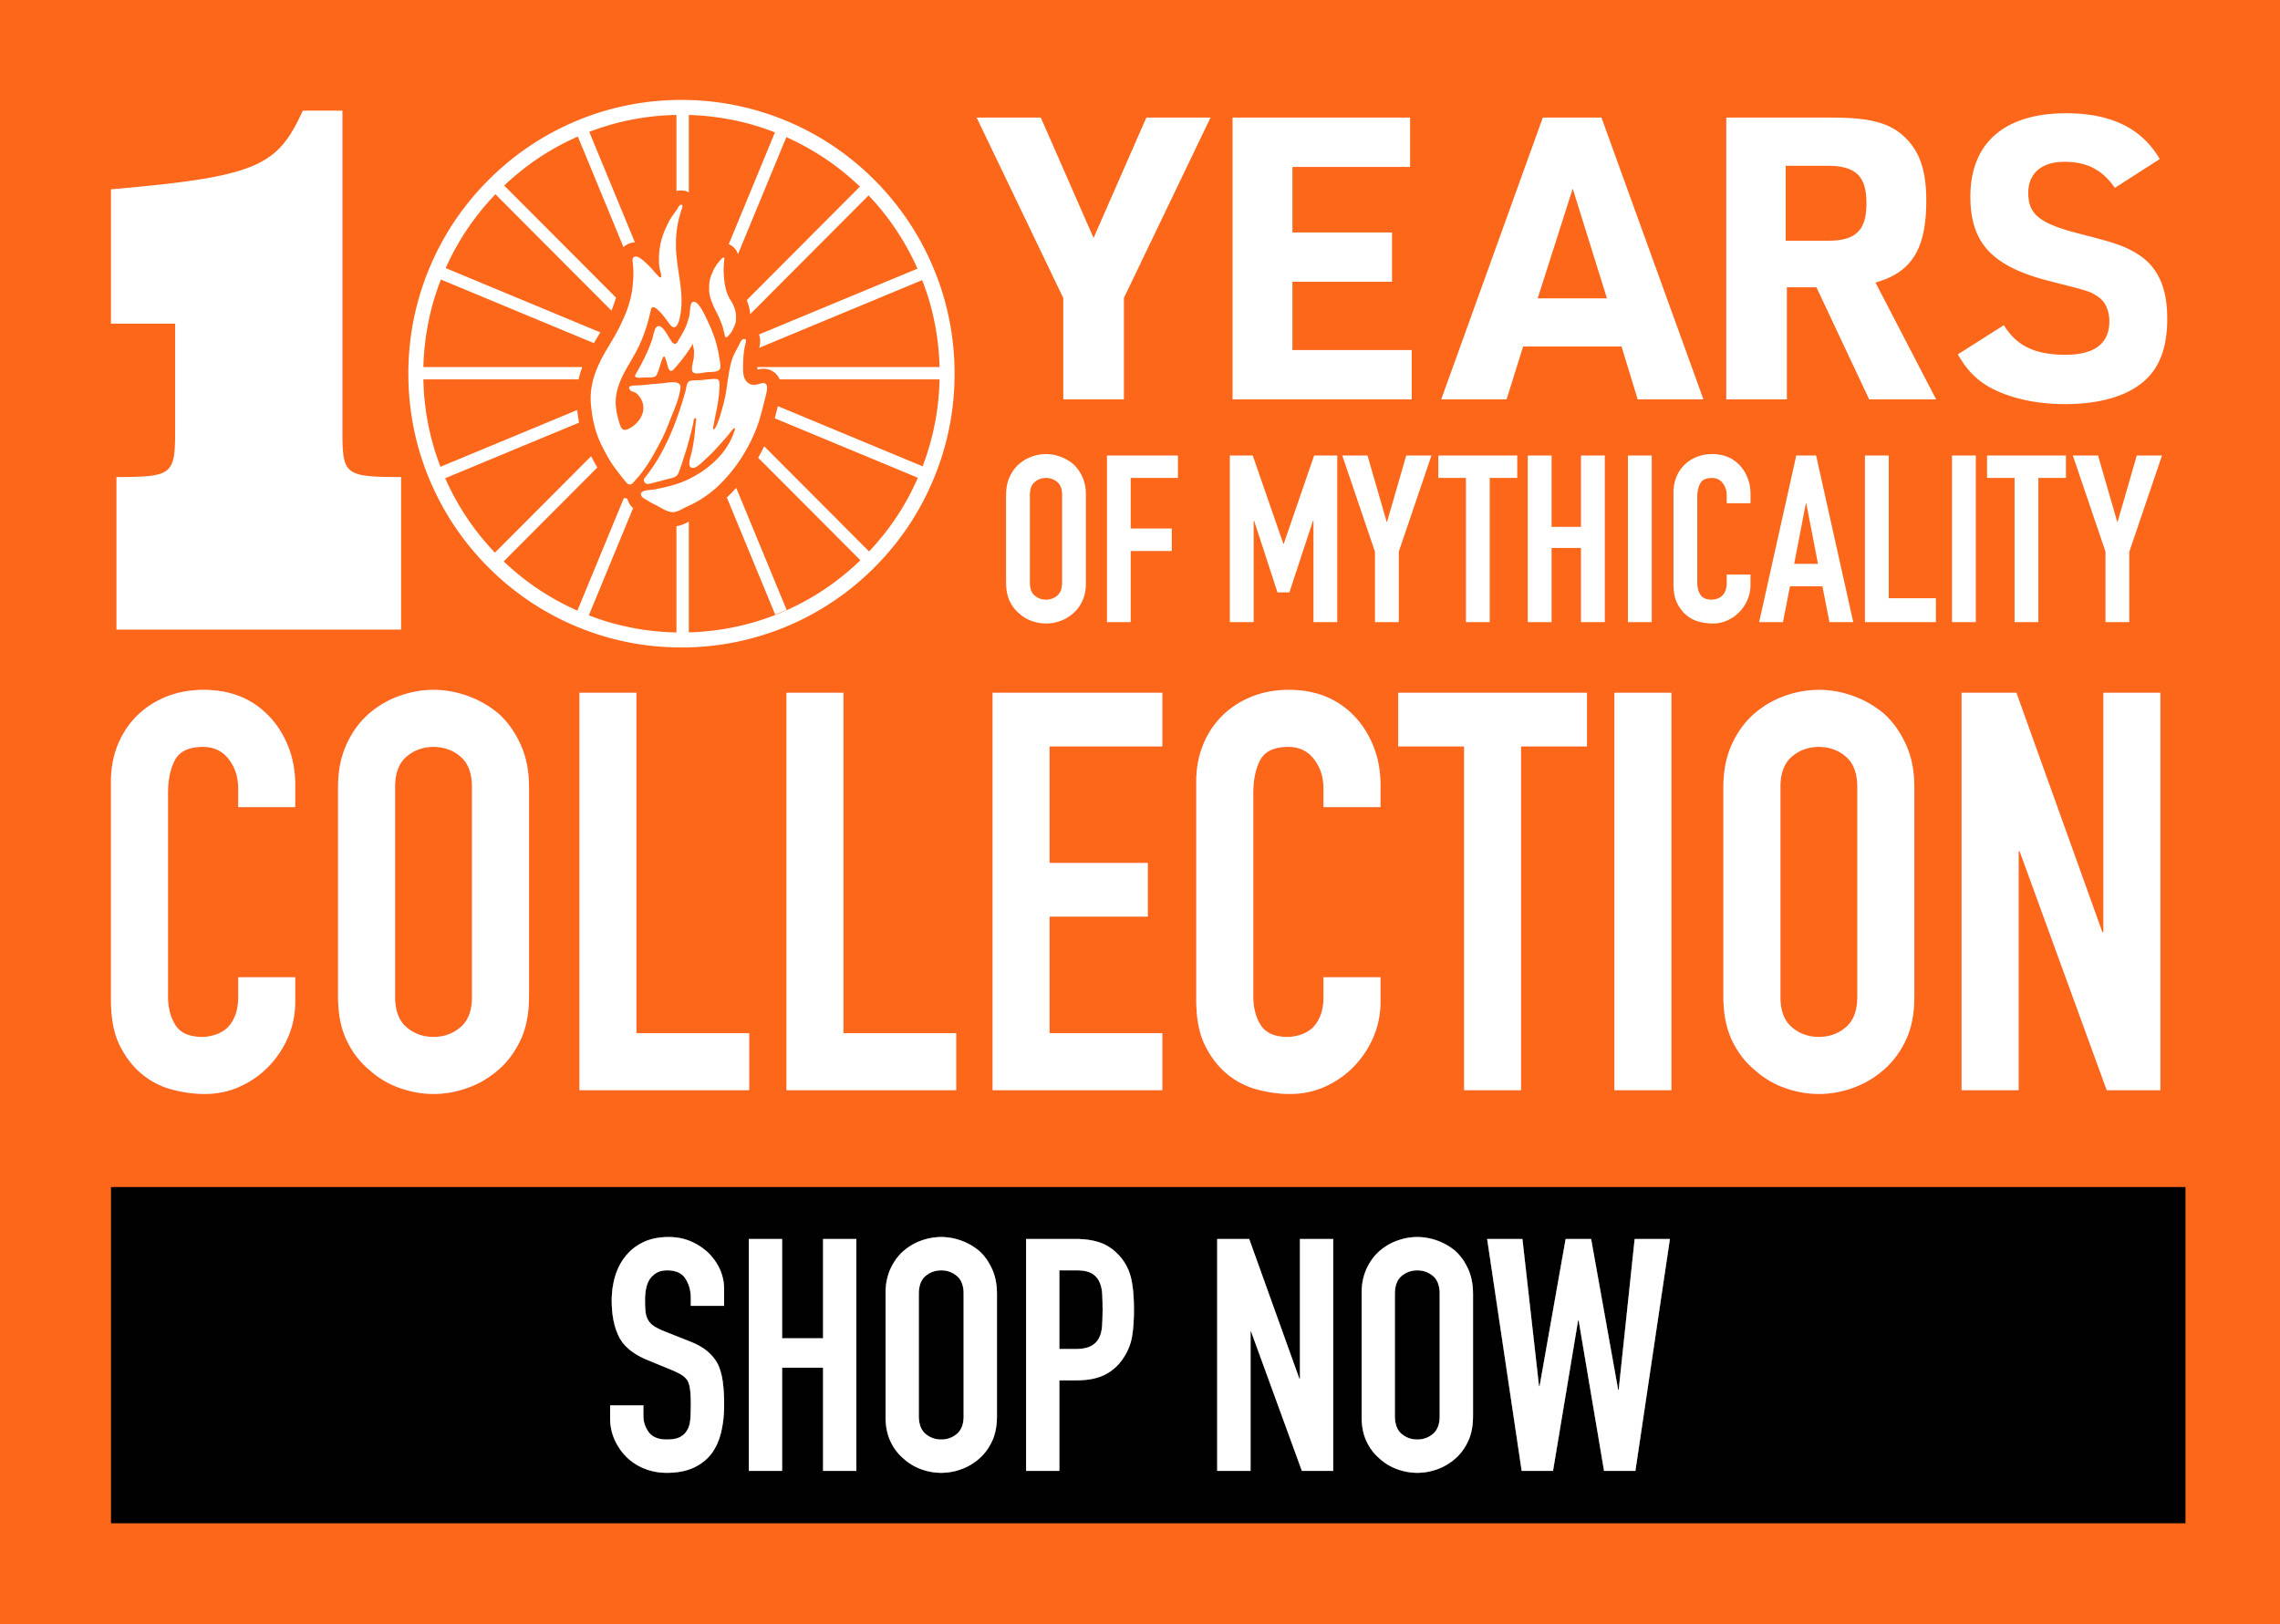 10 years of Mythicality collection - Shop Now